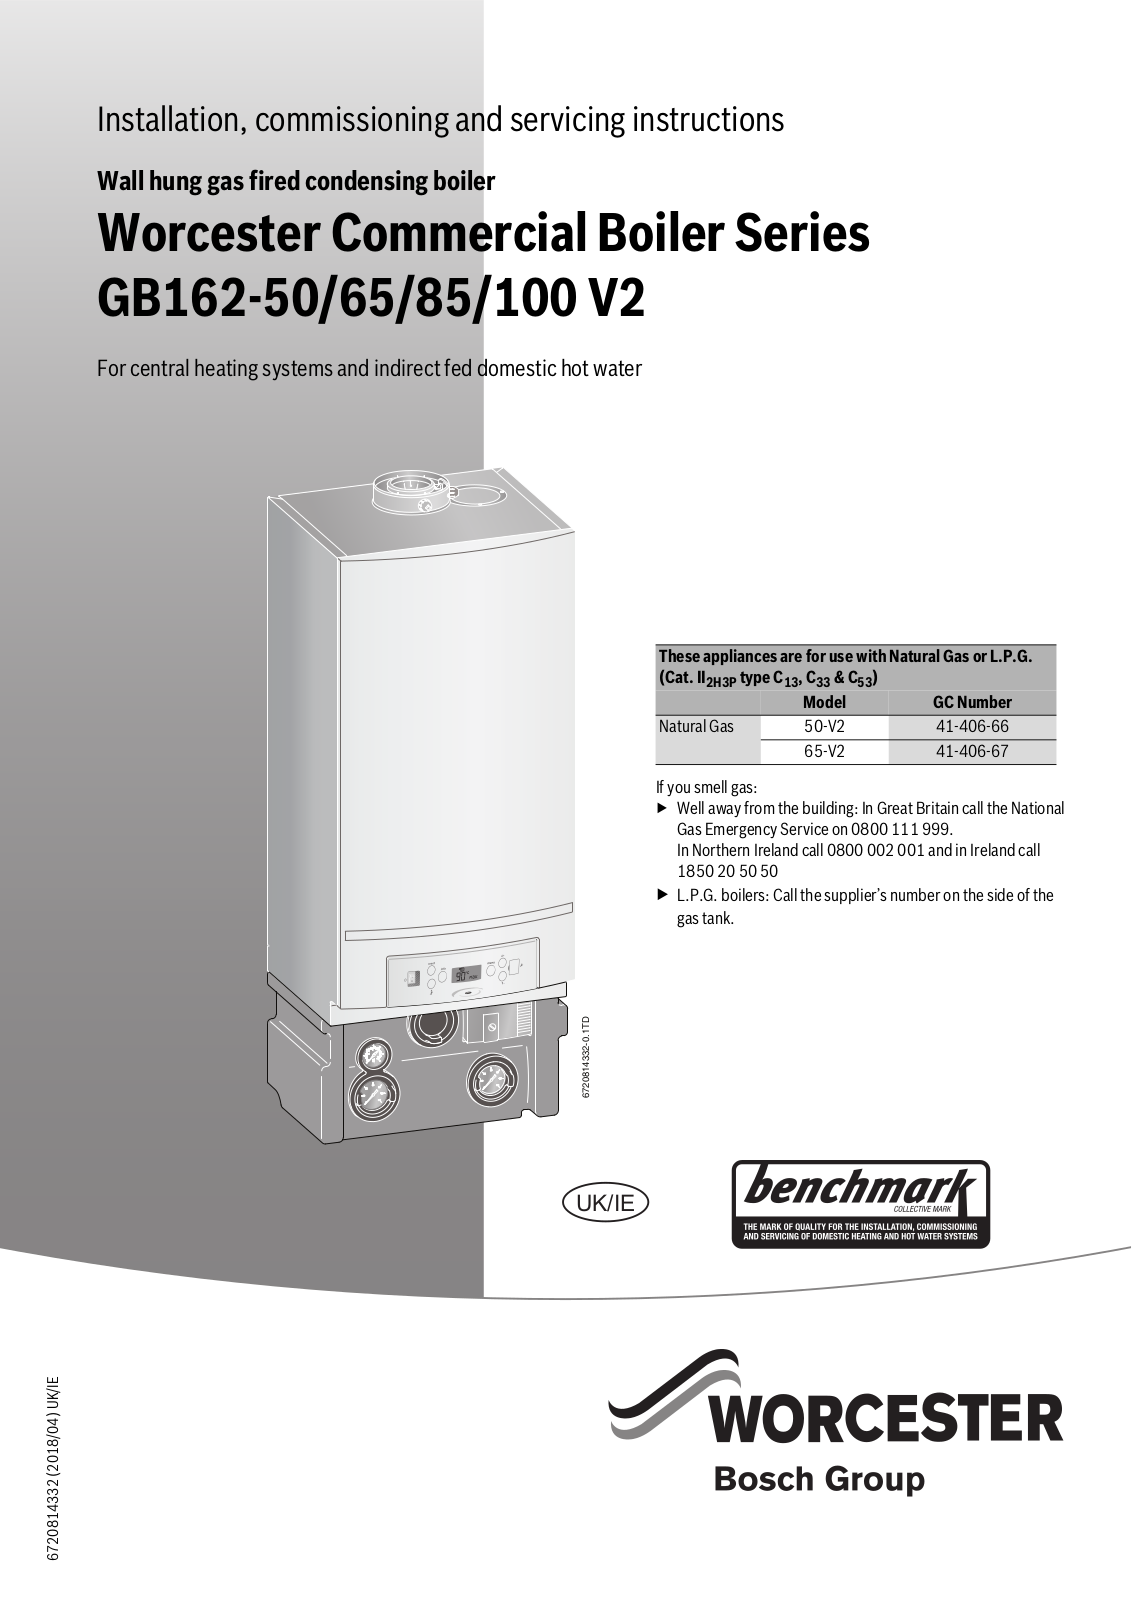 Bosch Worcester GB162-50 V2, Worcester GB162-100 V2, Worcester GB162-65 V2, Worcester GB162-85 V2 Installation, Commissioning And Servicing Instructions